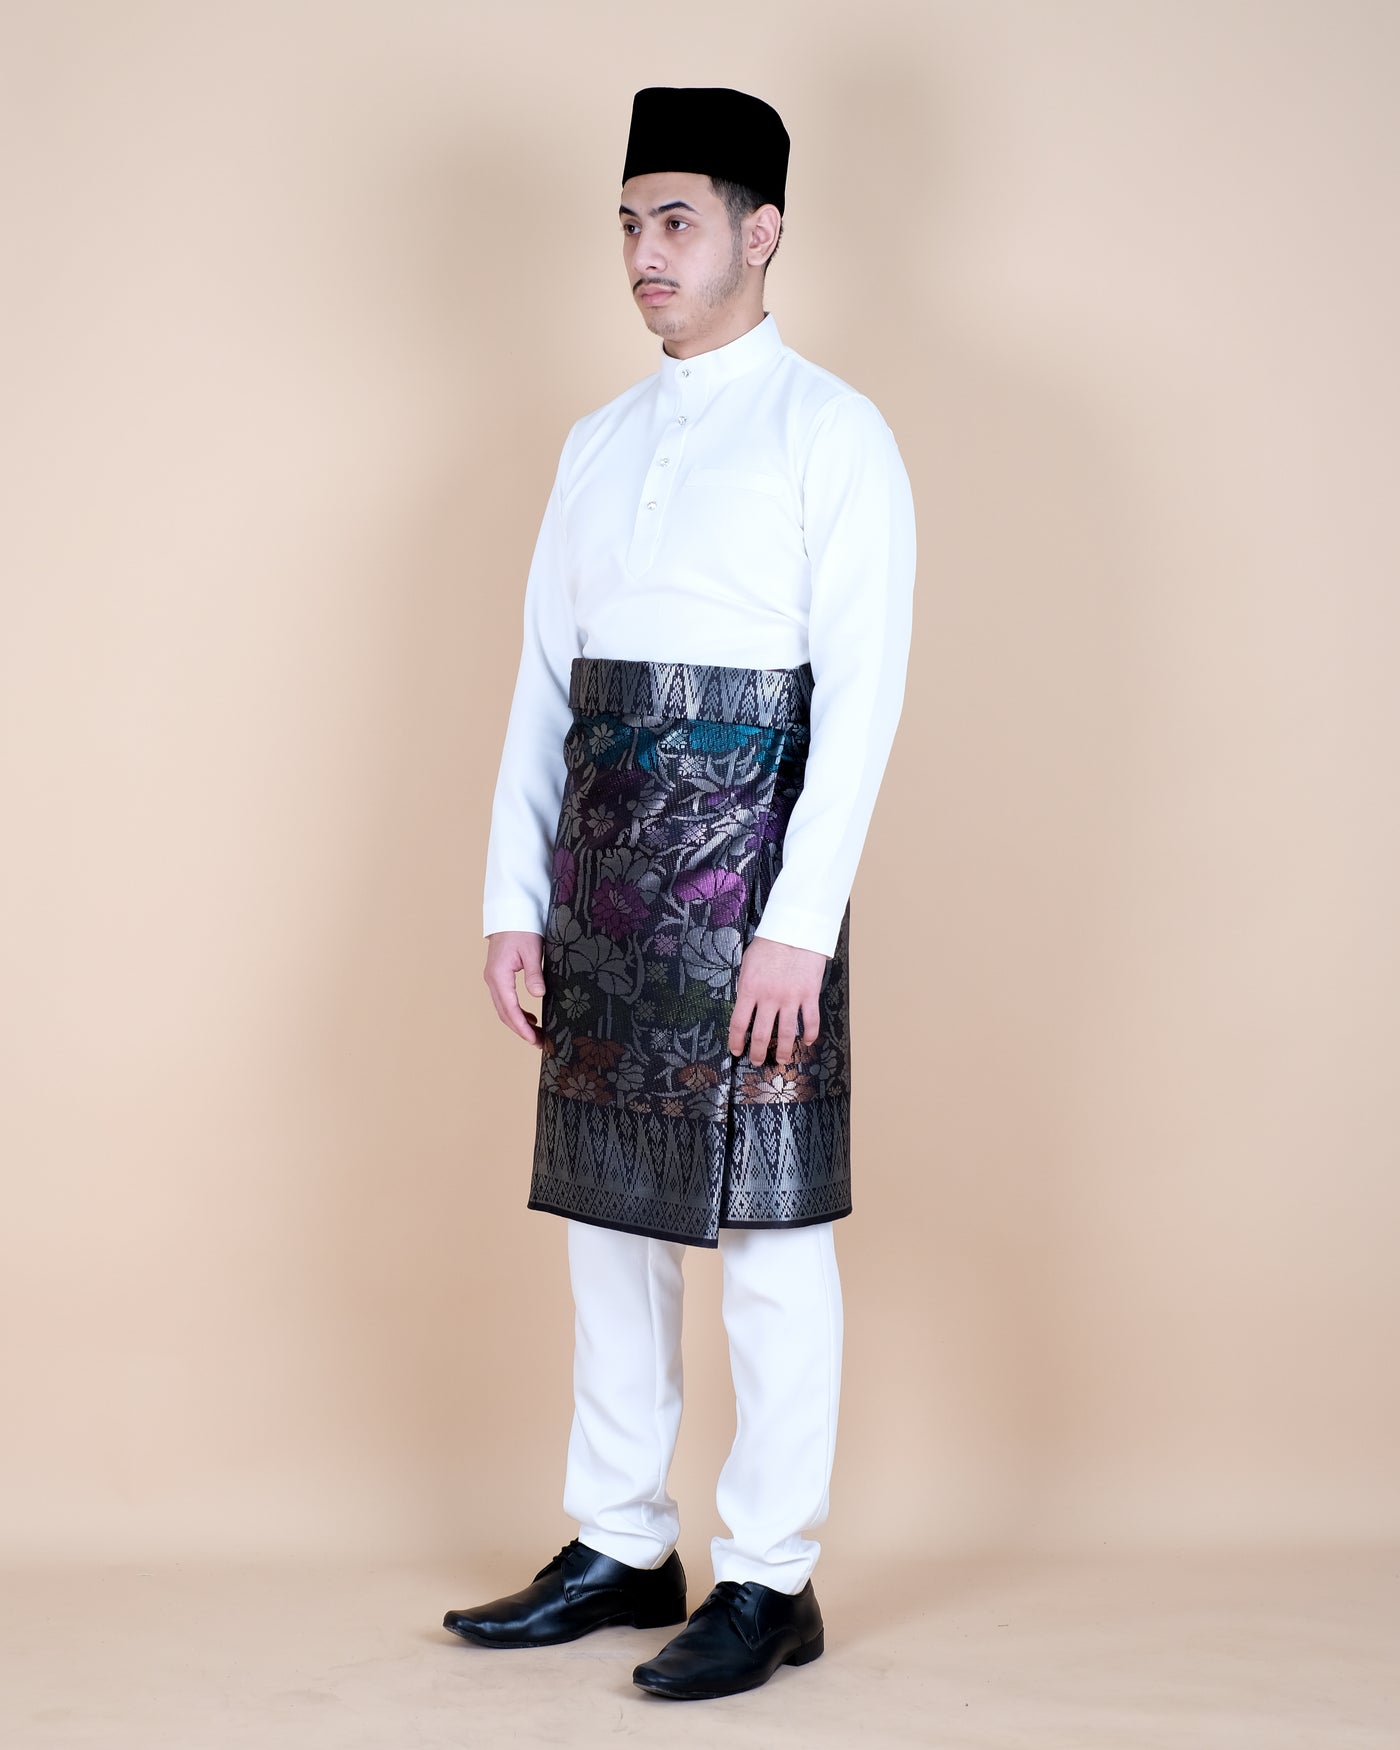 Songket Instant - Black Silver (SI 35)